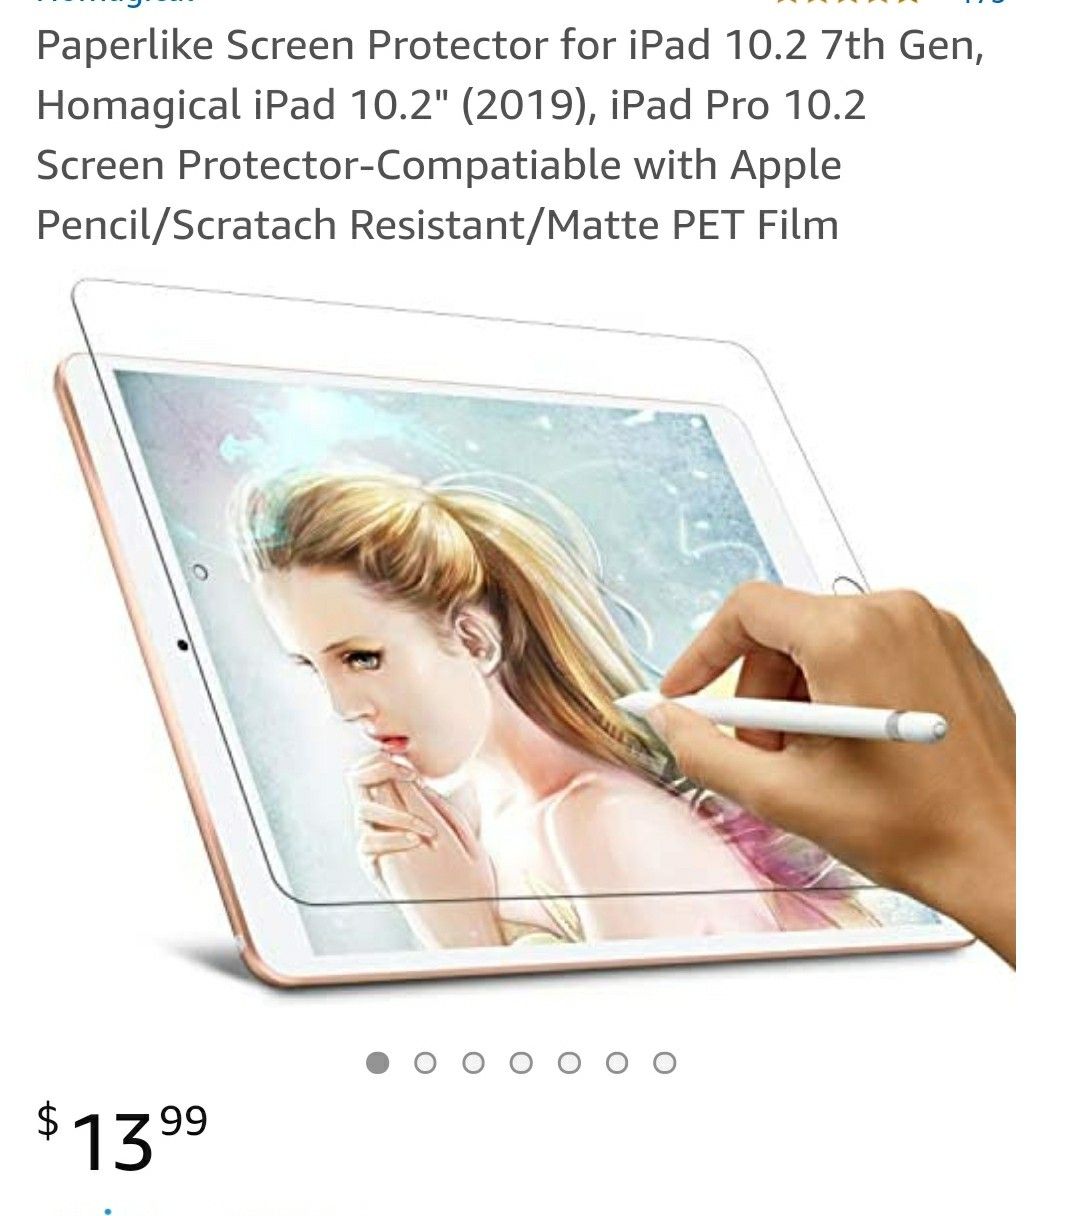 Paperlike Screen Protector for iPad 10.2 7th Gen